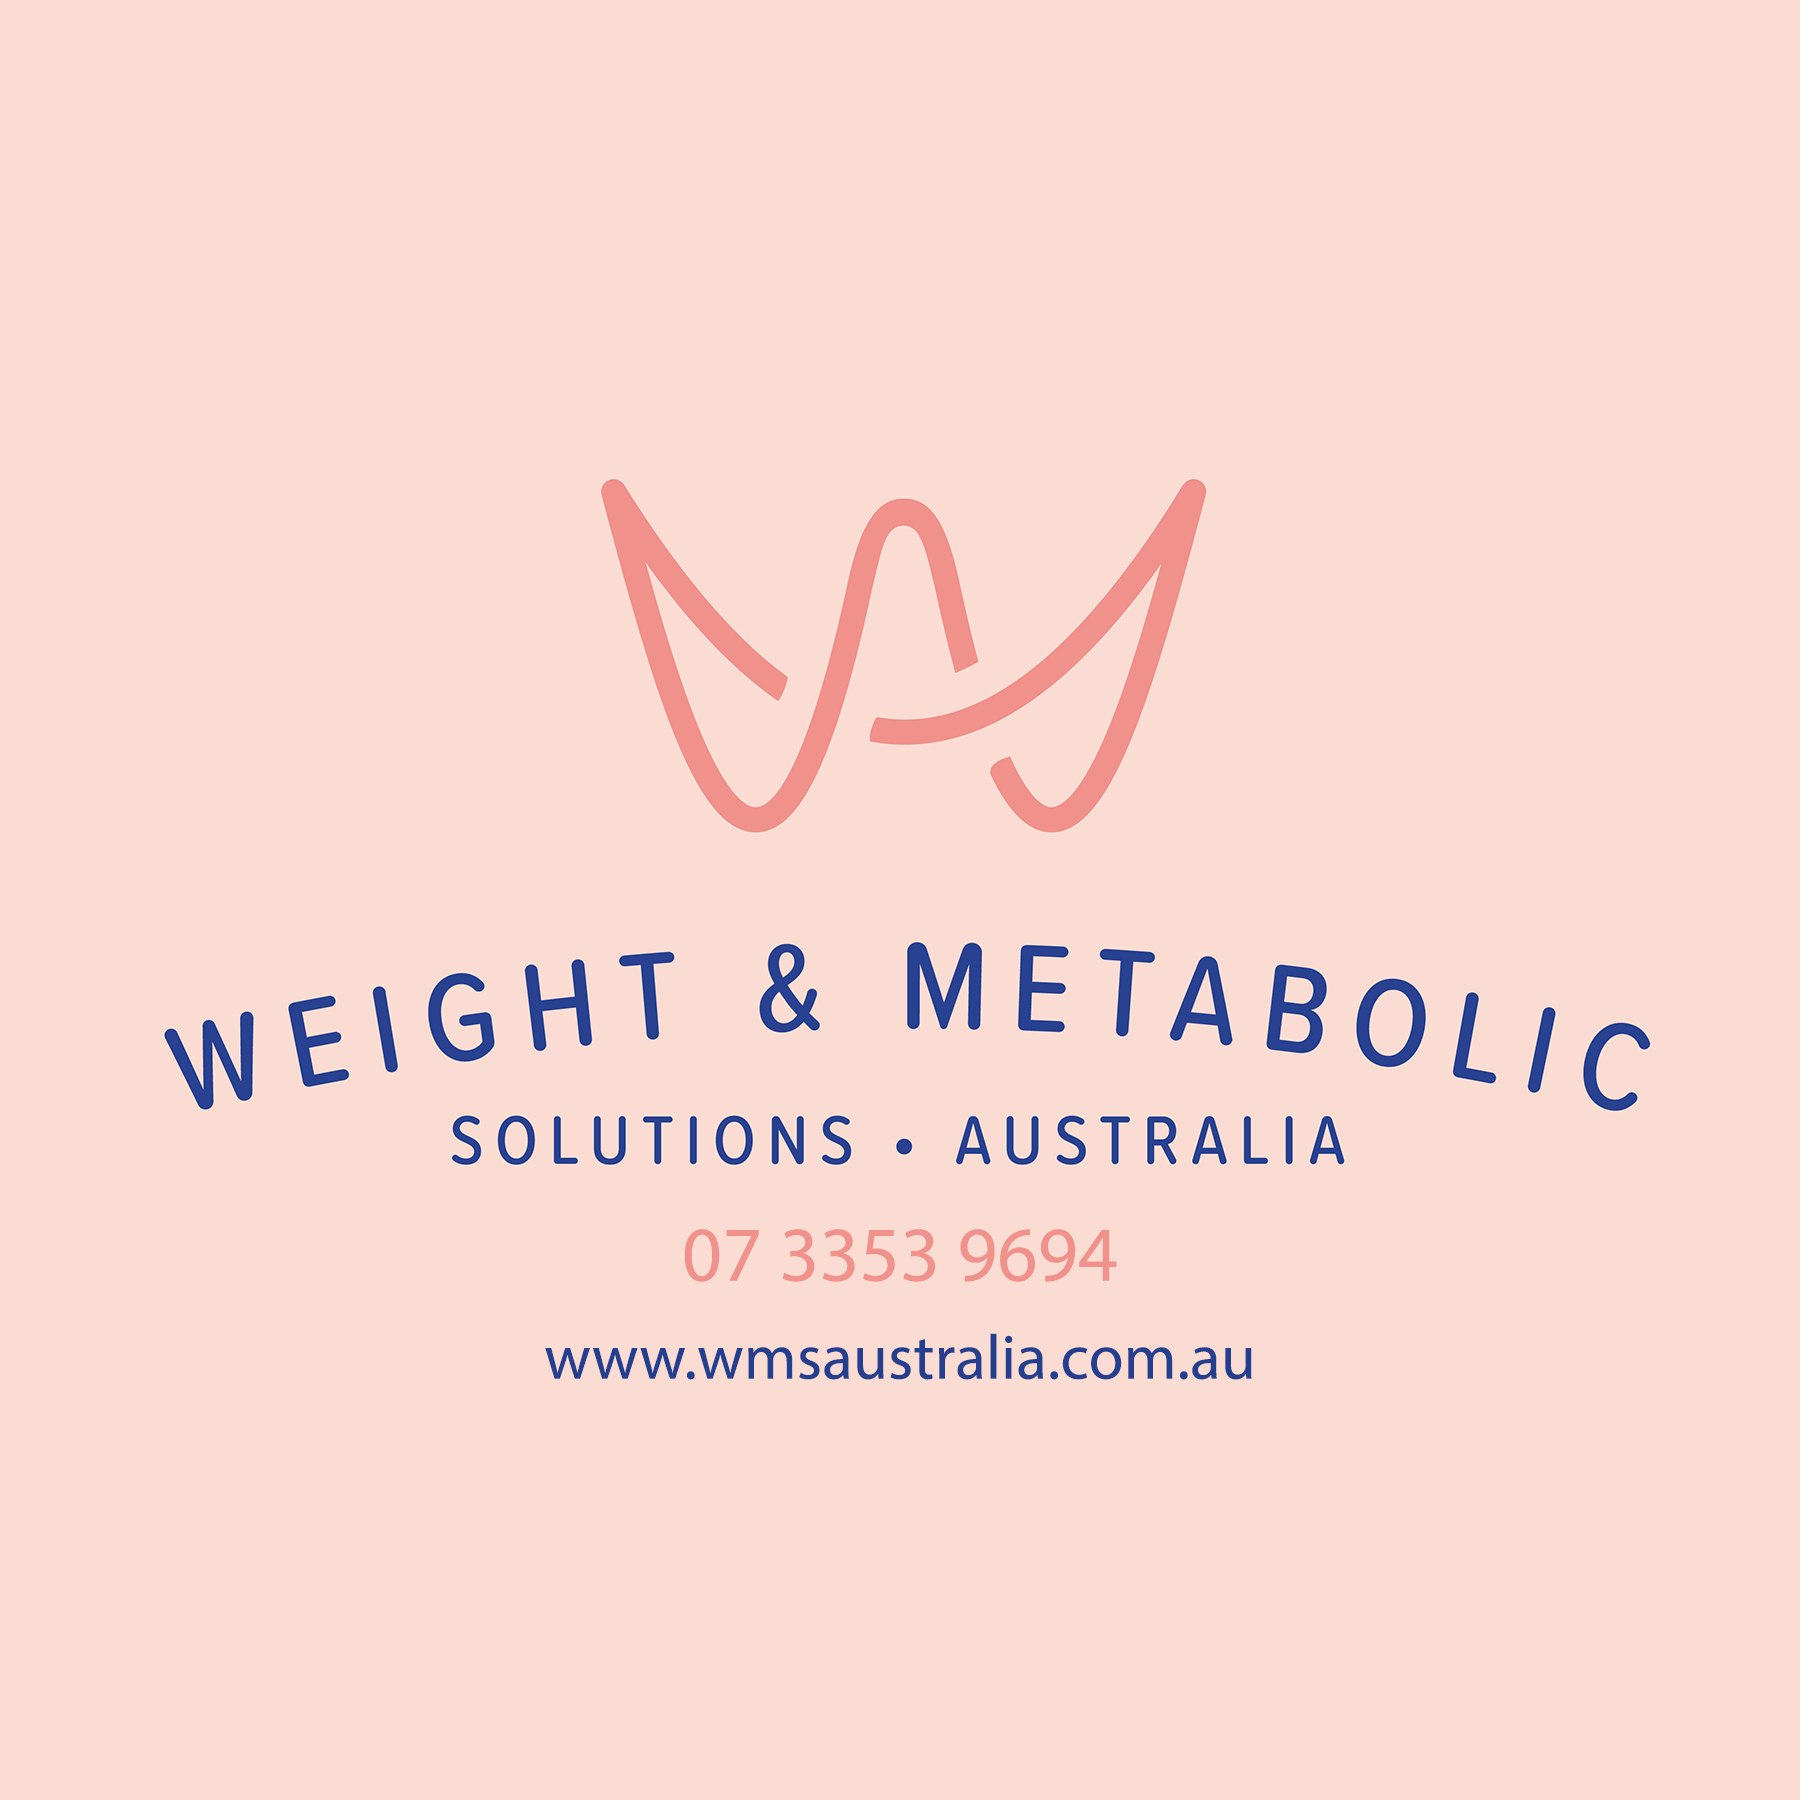 Weight & Metabolic Solutions Australia - Chermside, QLD 4032 - (07) 3353 9694 | ShowMeLocal.com